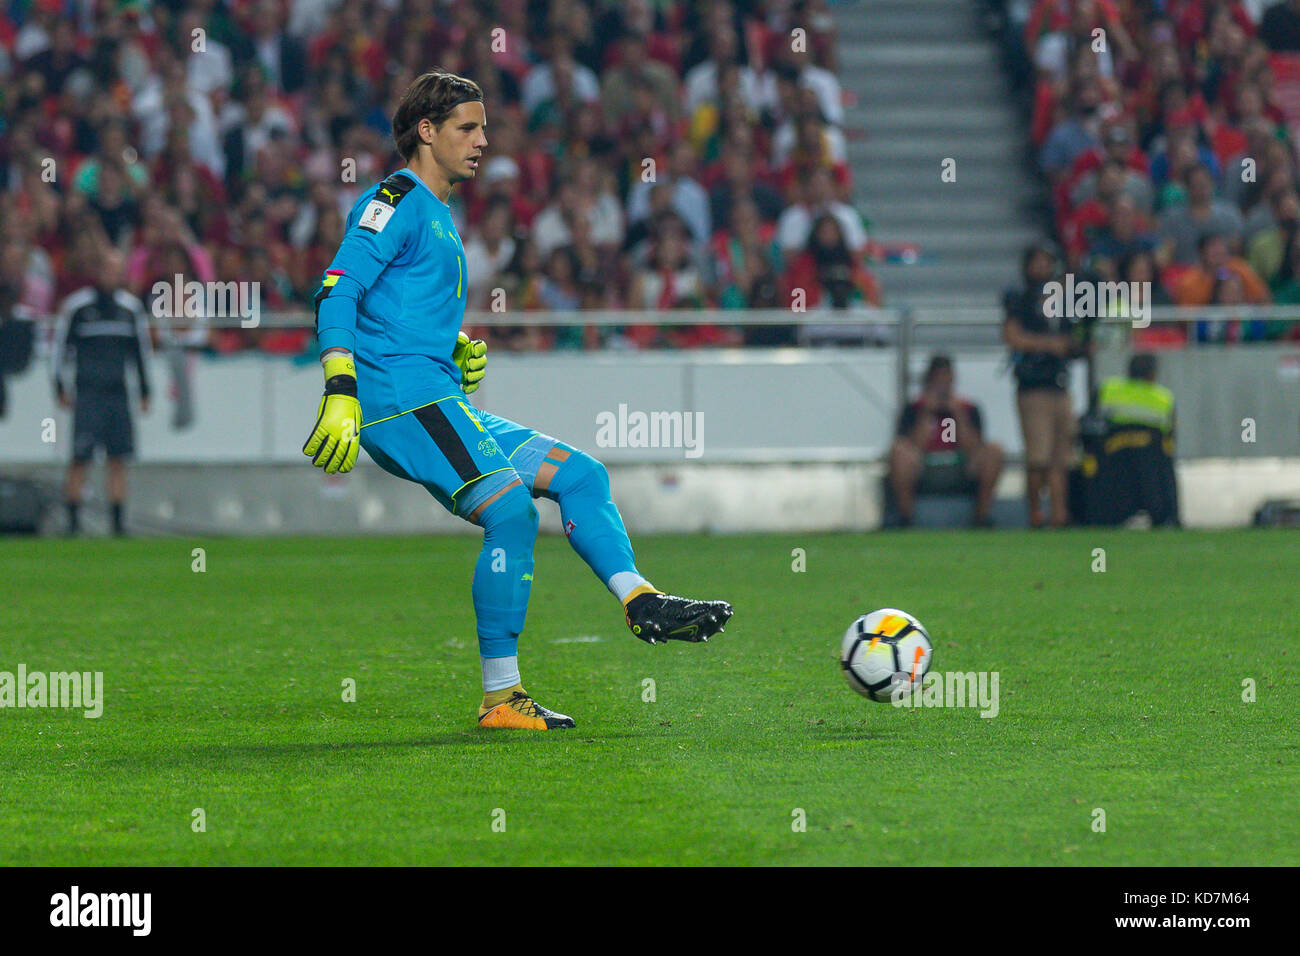 Lisbon, Portugal. 10th Oct, 2017. Switzerland's goalkeeper Yann Sommer (1) during the FIFA 2018 World Cup Qualifier between Portugal and Switzerland Credit: Alexandre de Sousa/Alamy Live News Stock Photo